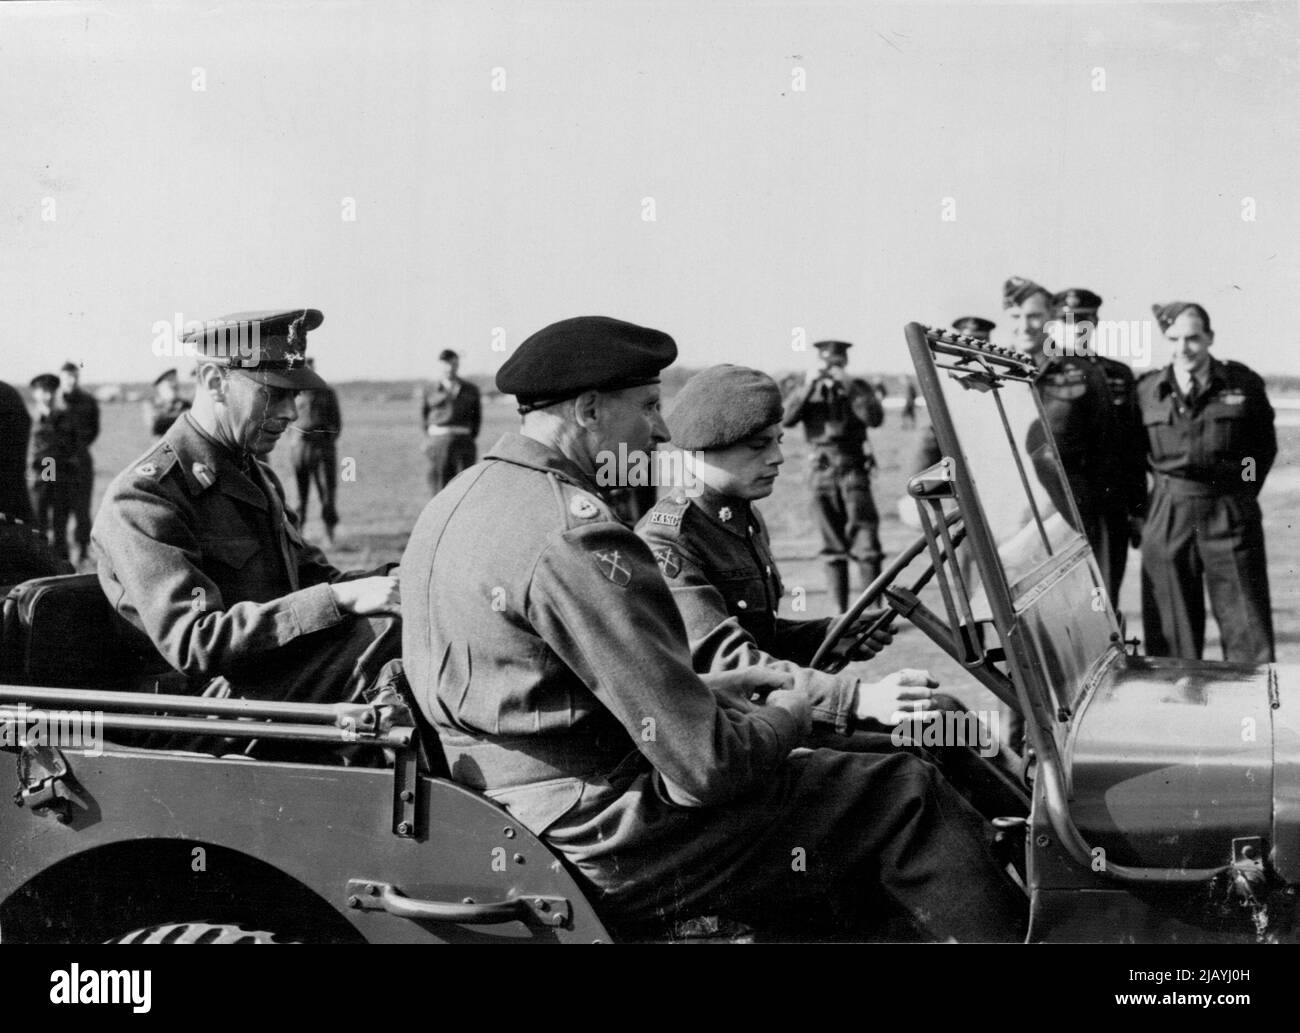 The King and Field Marshal leaving the aerodrome in a jeep. January 04, 1945. (Photo by PNA). Stock Photo